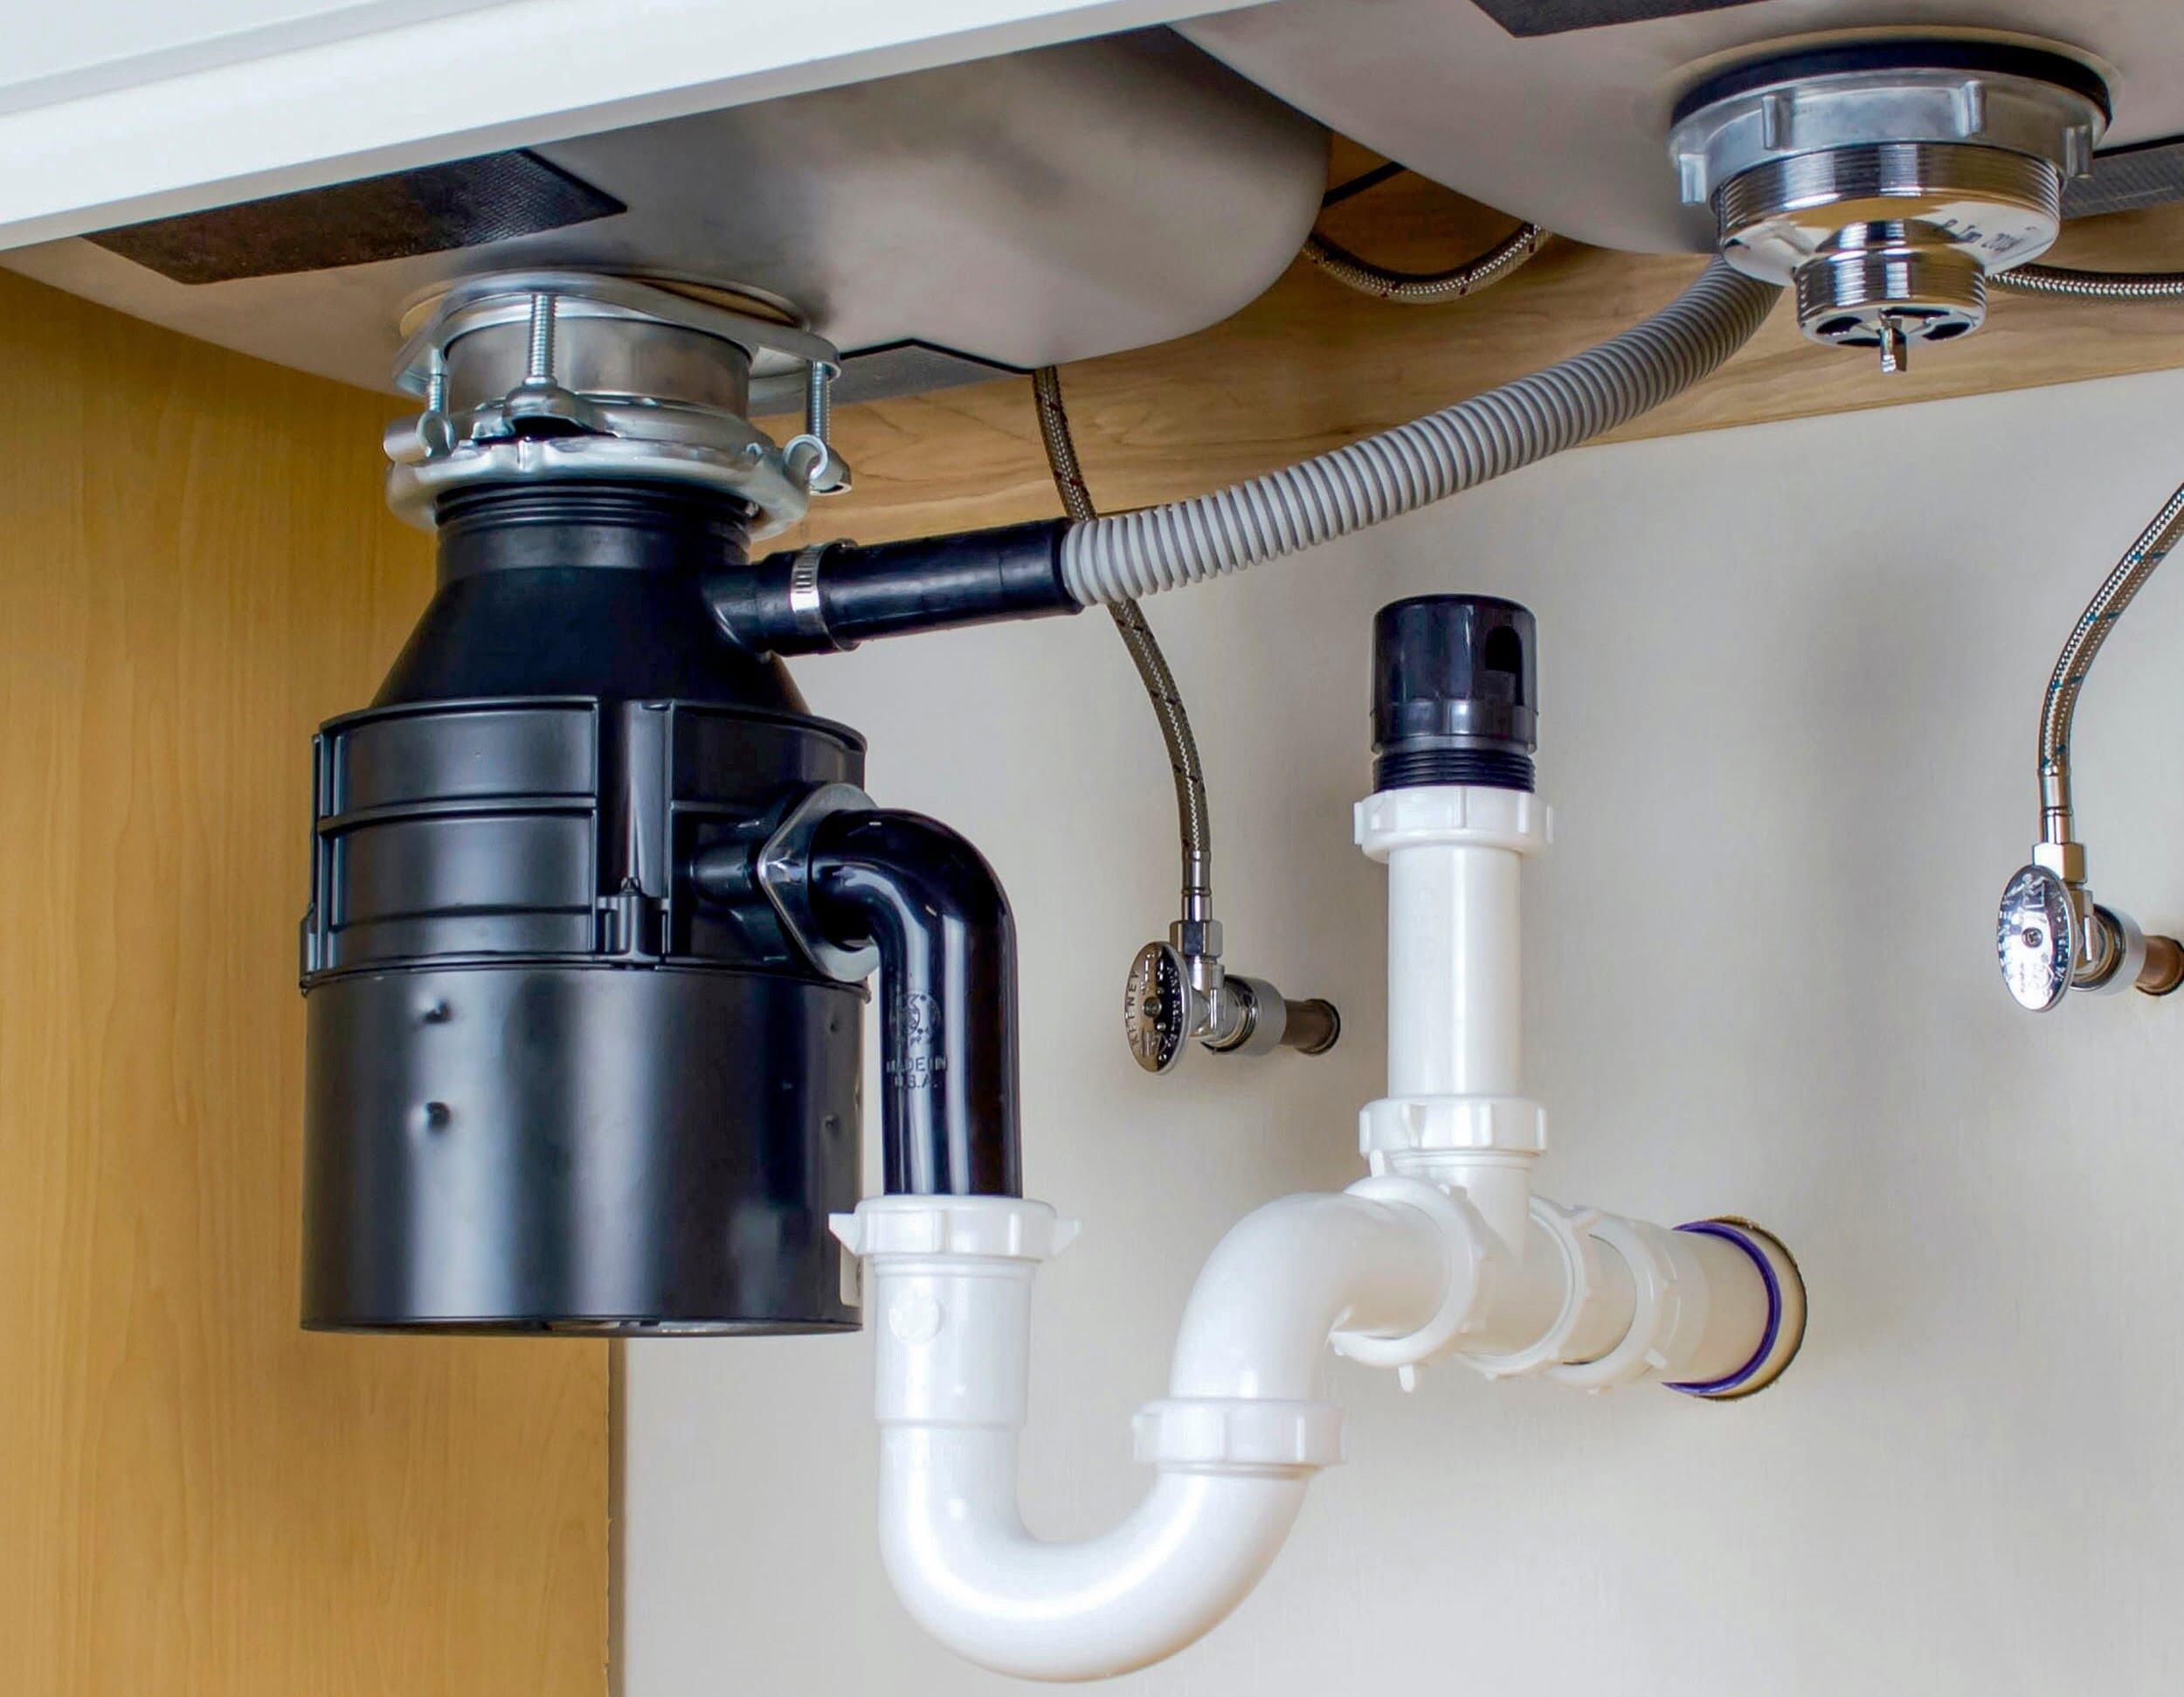 How To Install An Air Gap Under The Sink